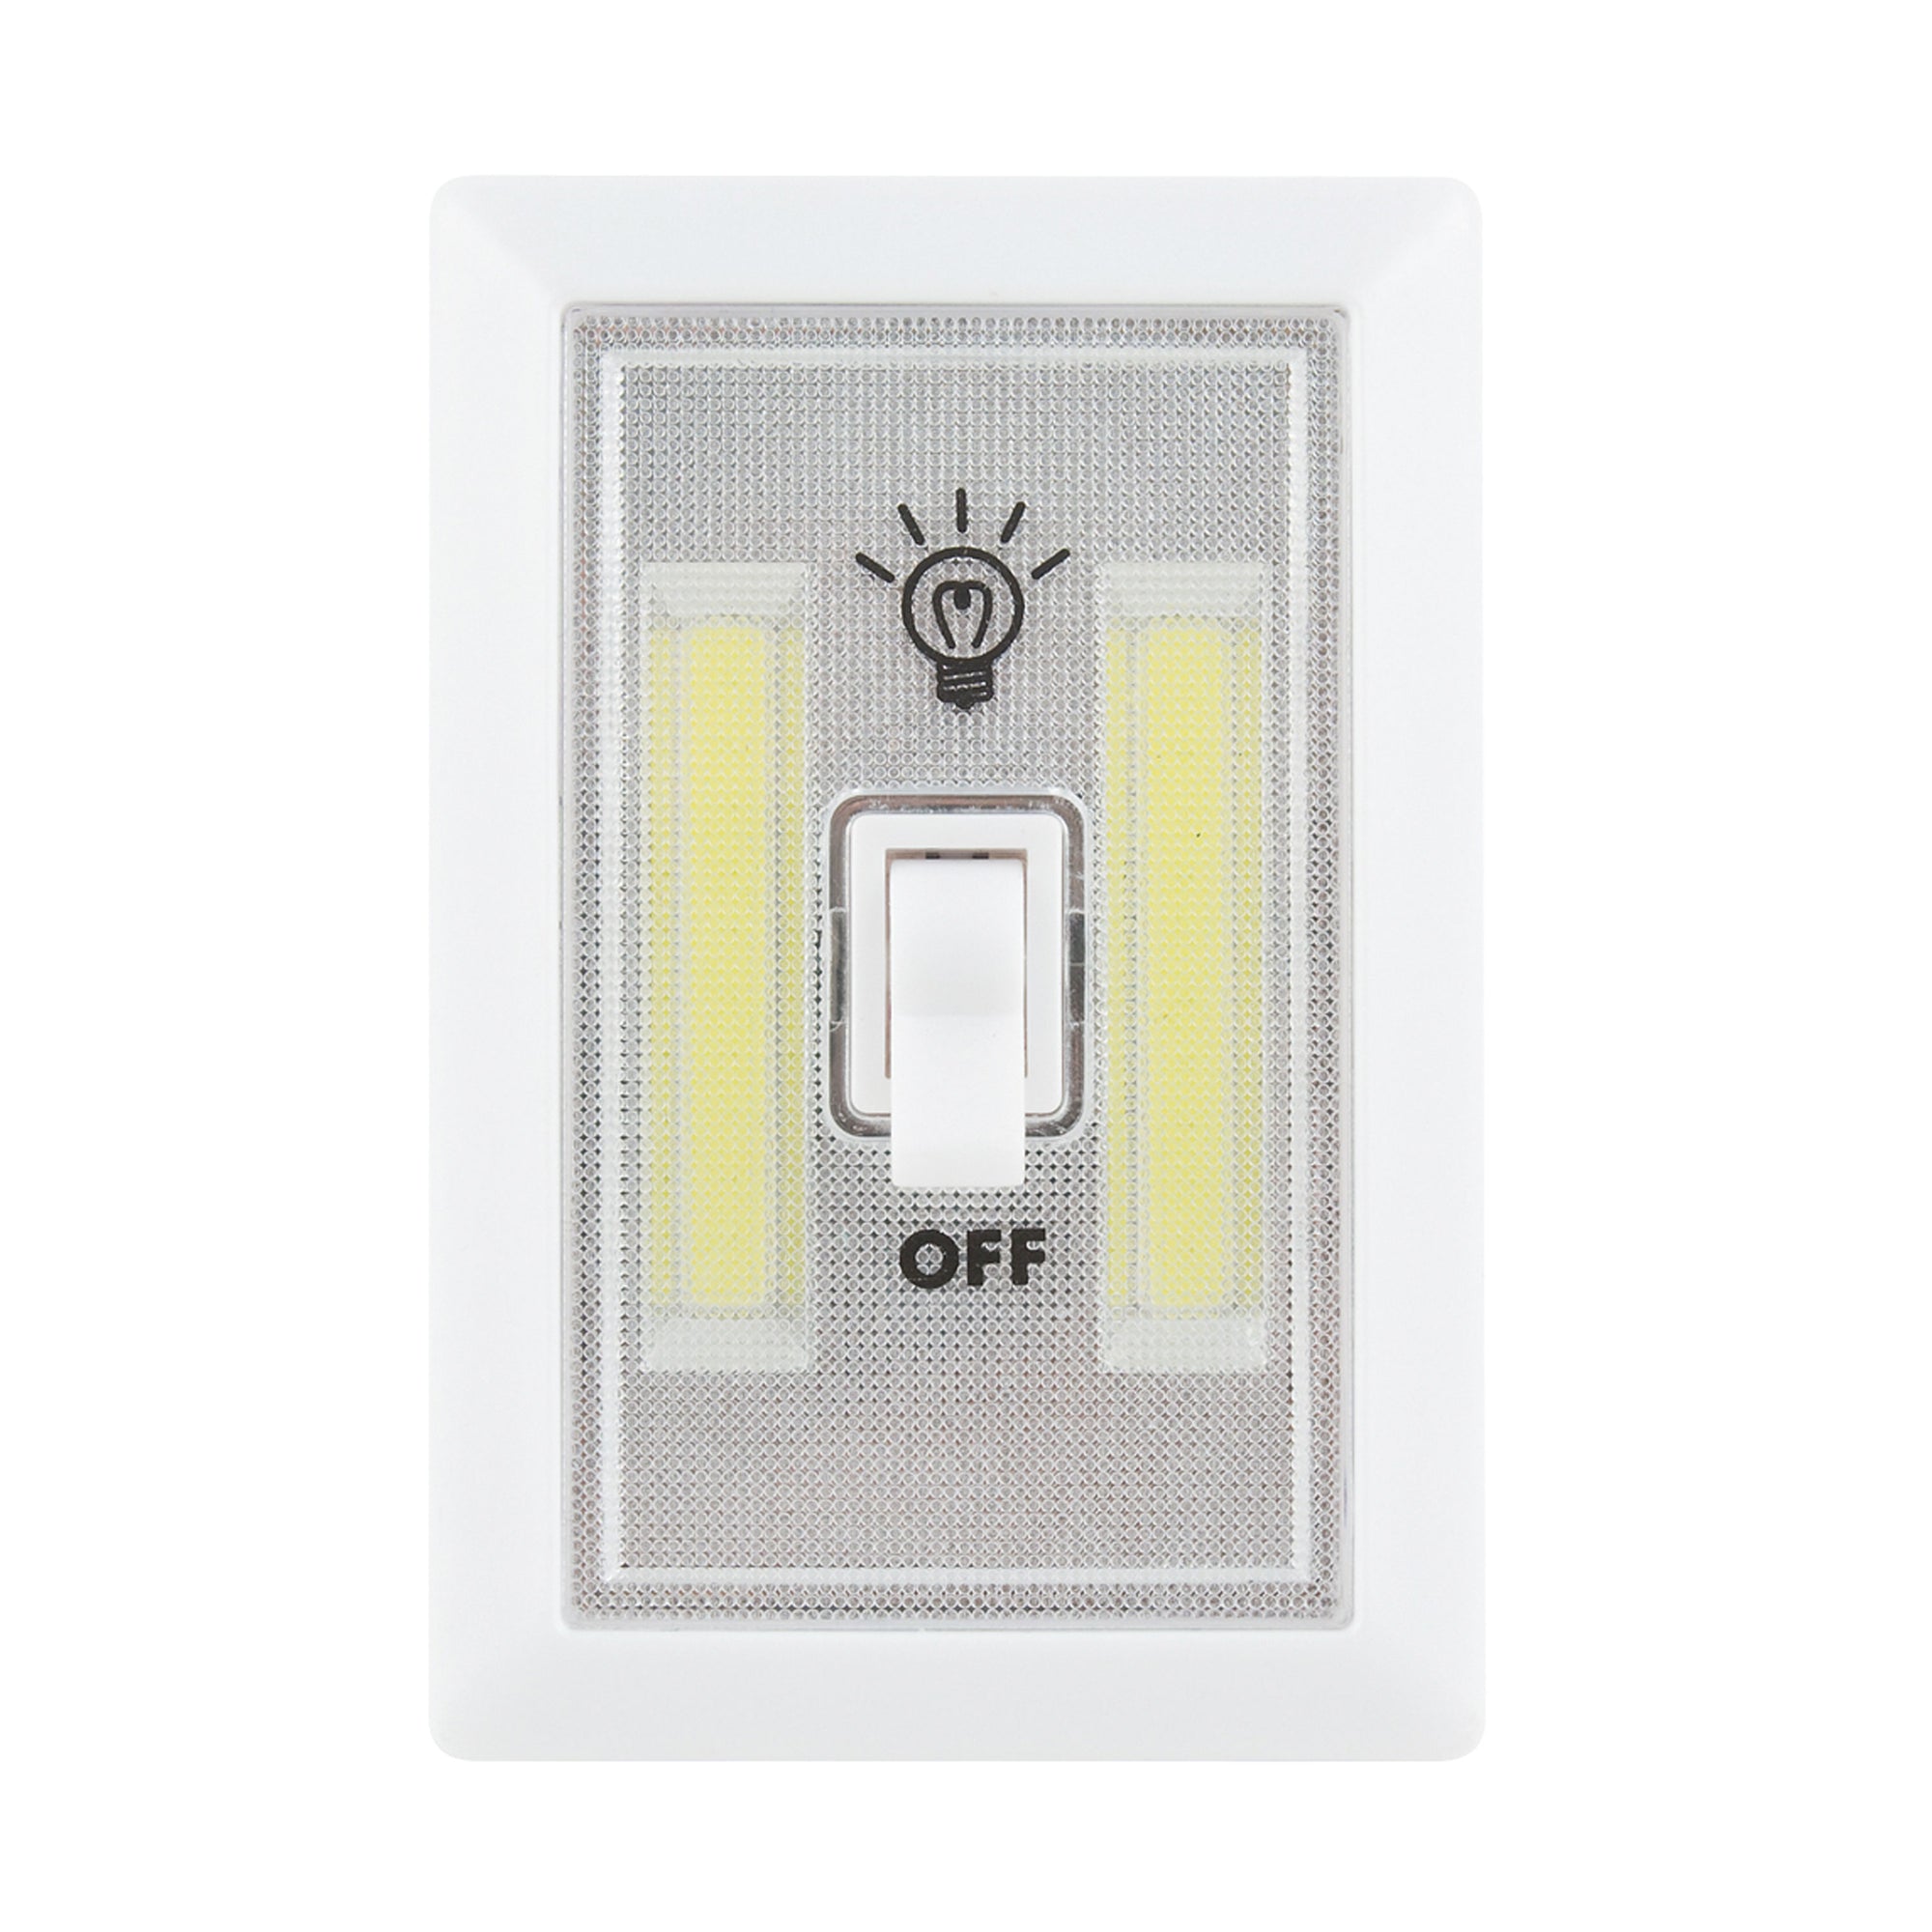 AP Products 025-020 Glow Max Cordless Light Switch